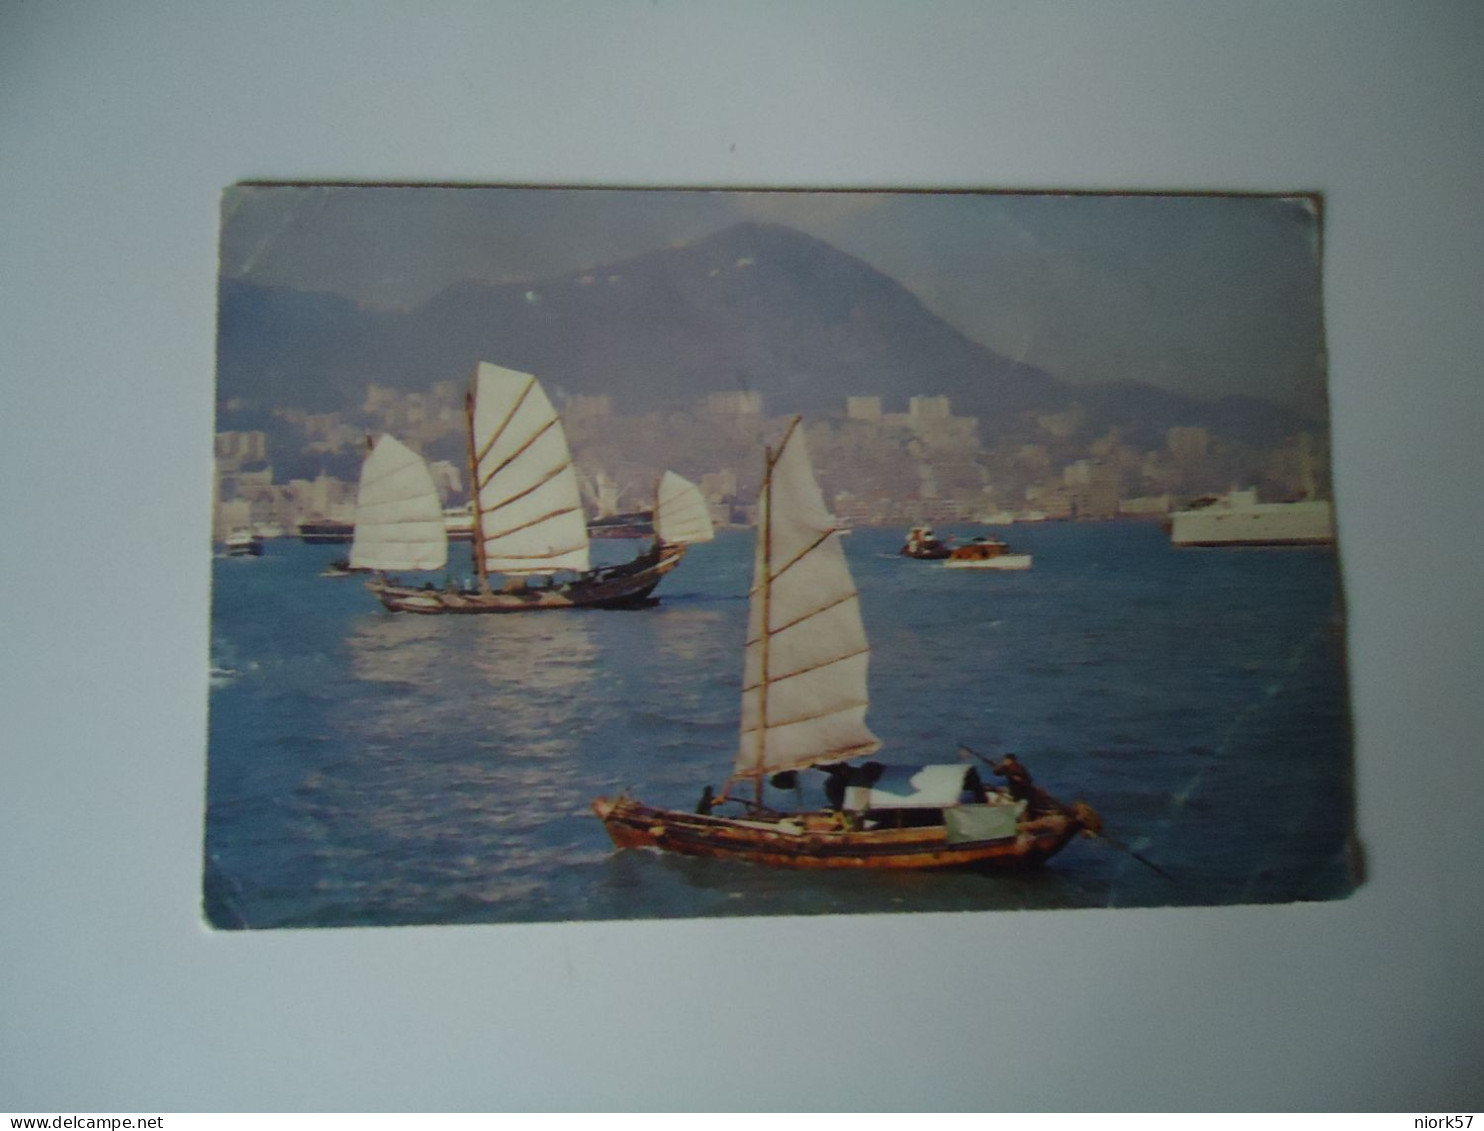 HONG KONG   POSTCARDS  1972 BOATS VIEW OF THE HARBOR  FOR MORE PURCHASES 10% DISCOUNT - Chine (Hong Kong)